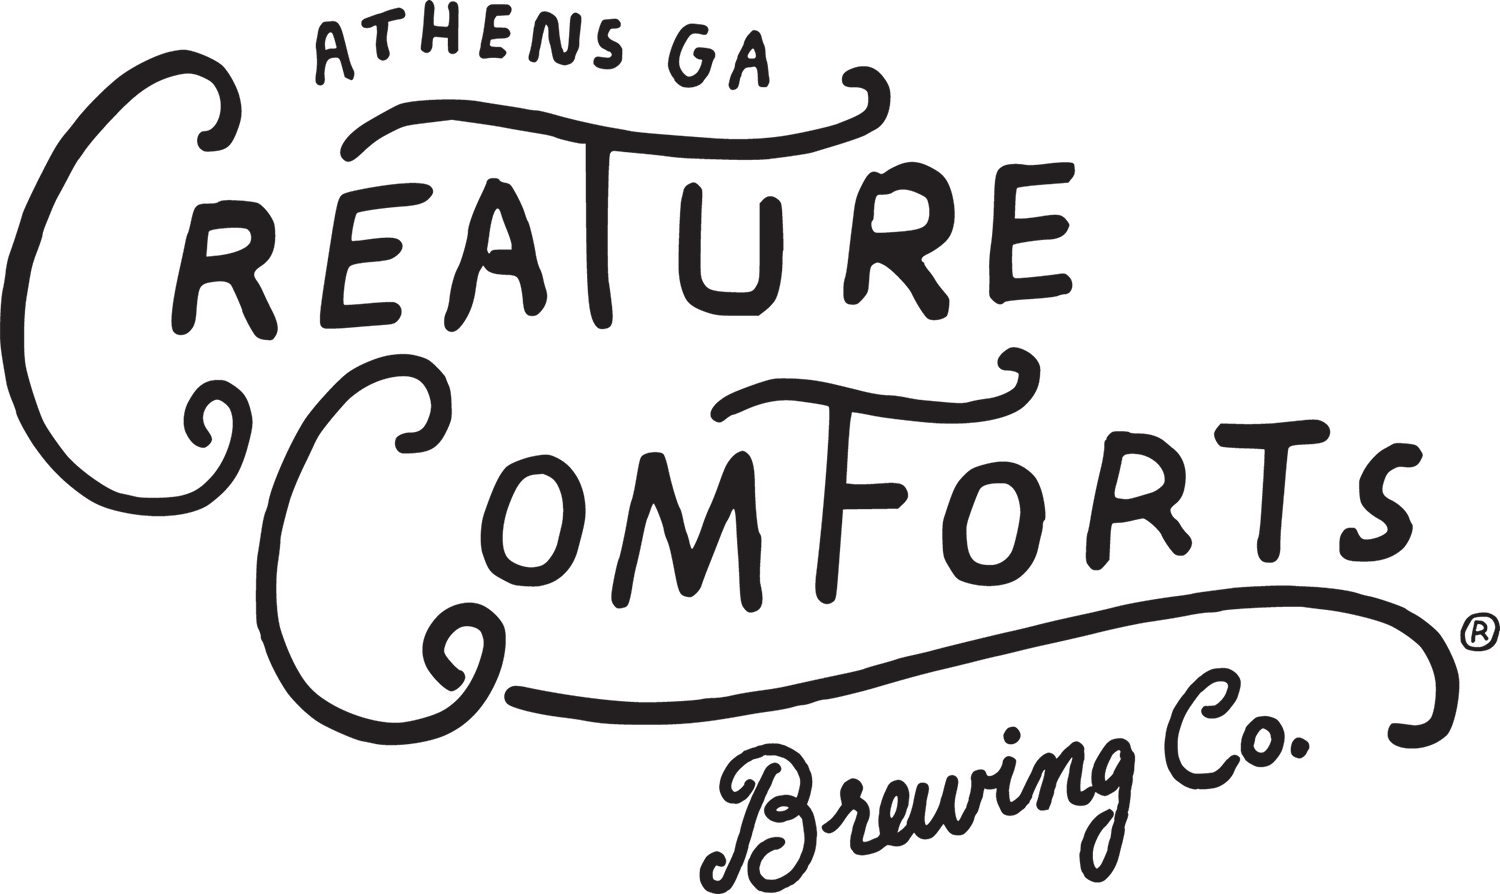 Creature Comforts Brewing Co Logo